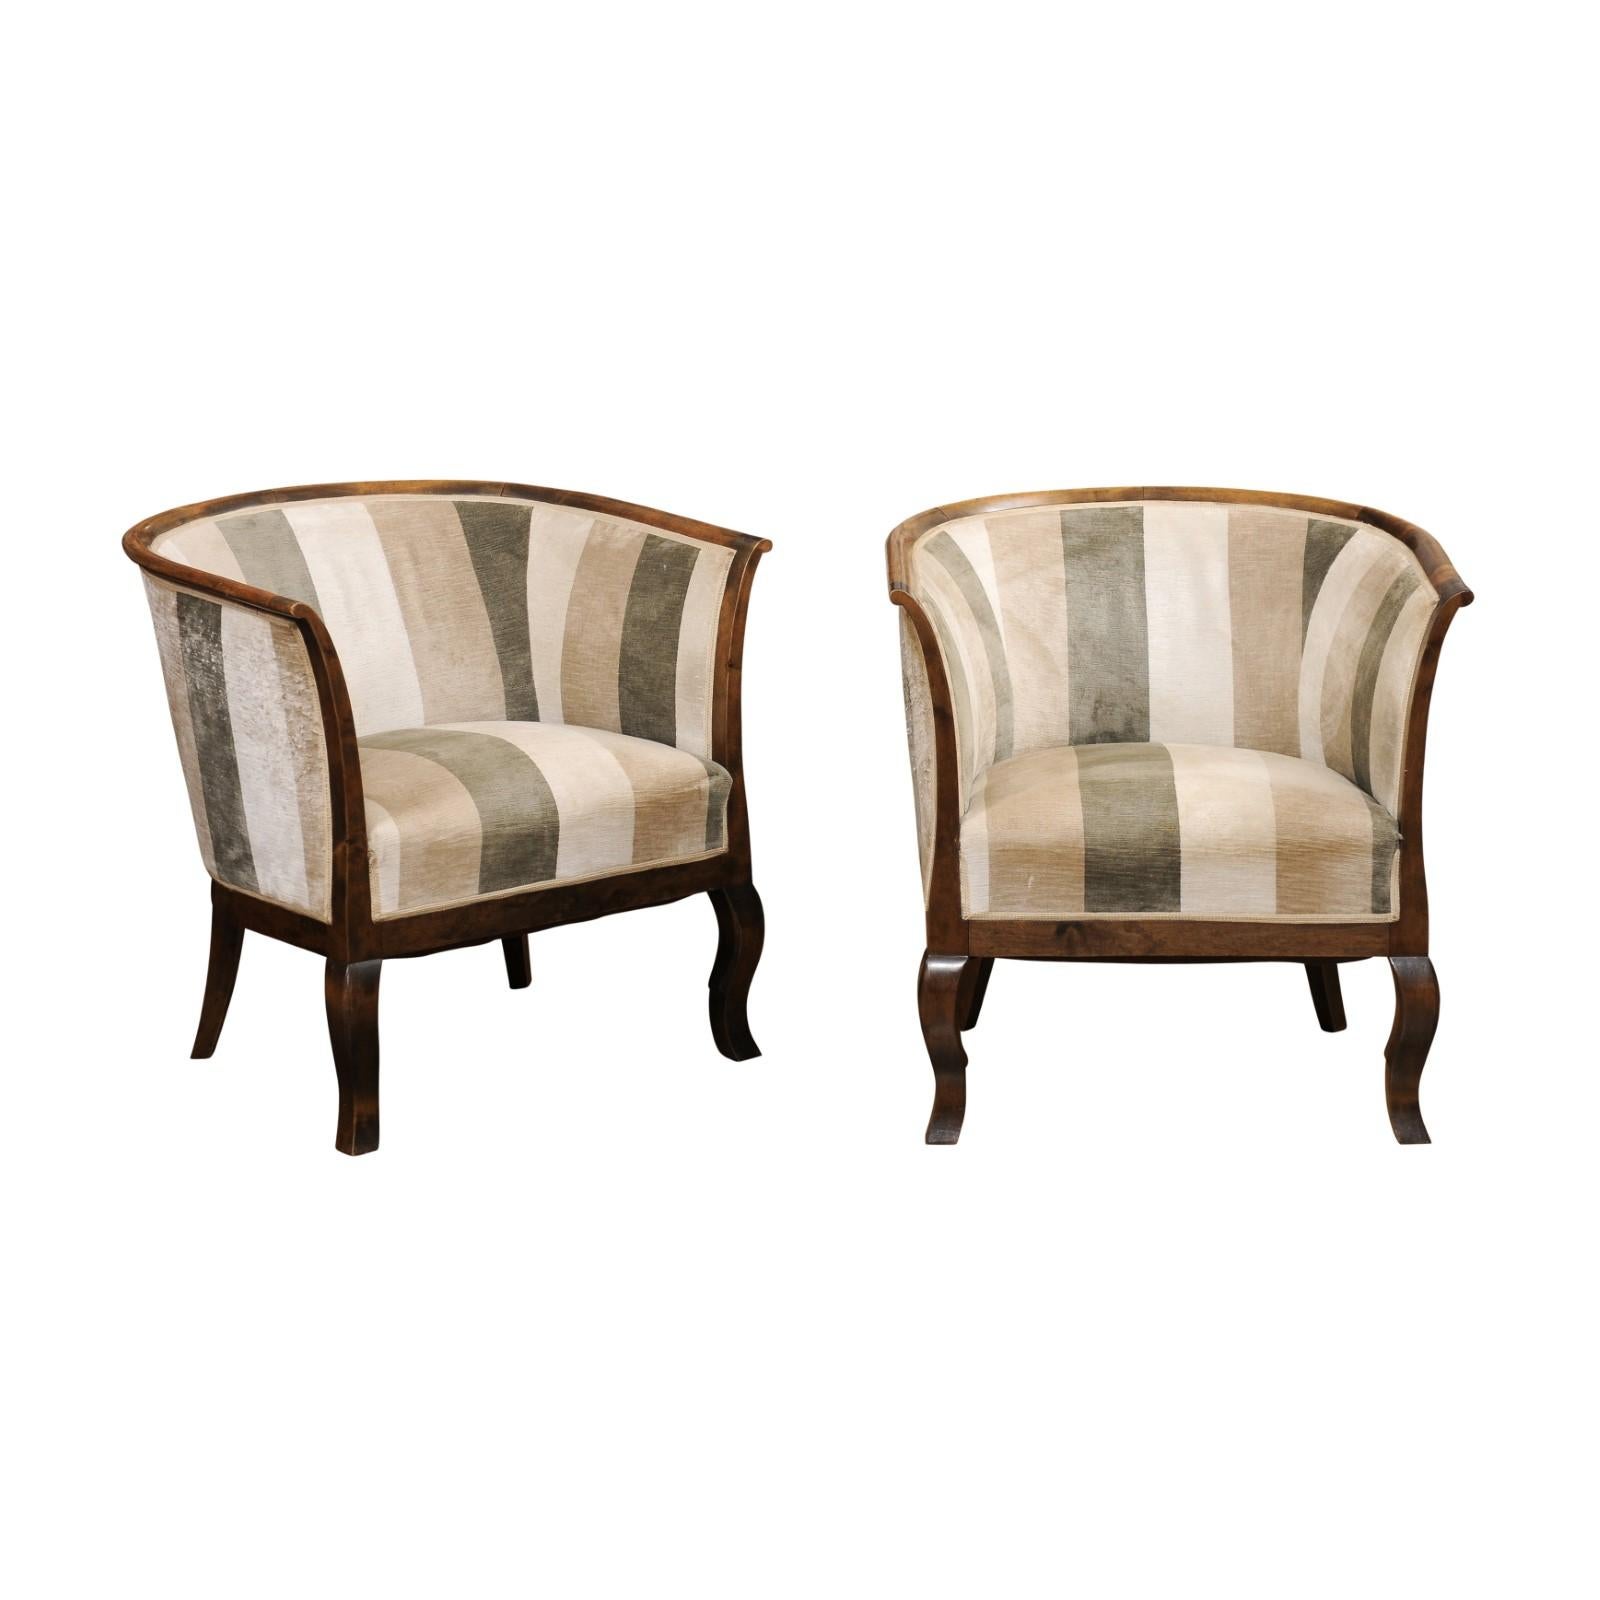 A pair of Scandinavian Midcentury birch wood club armchairs circa 1950 with horseshoe backs. Discover the quintessential blend of form and function with this pair of Scandinavian Midcentury birch wood club armchairs, circa 1950, a duo that embodies